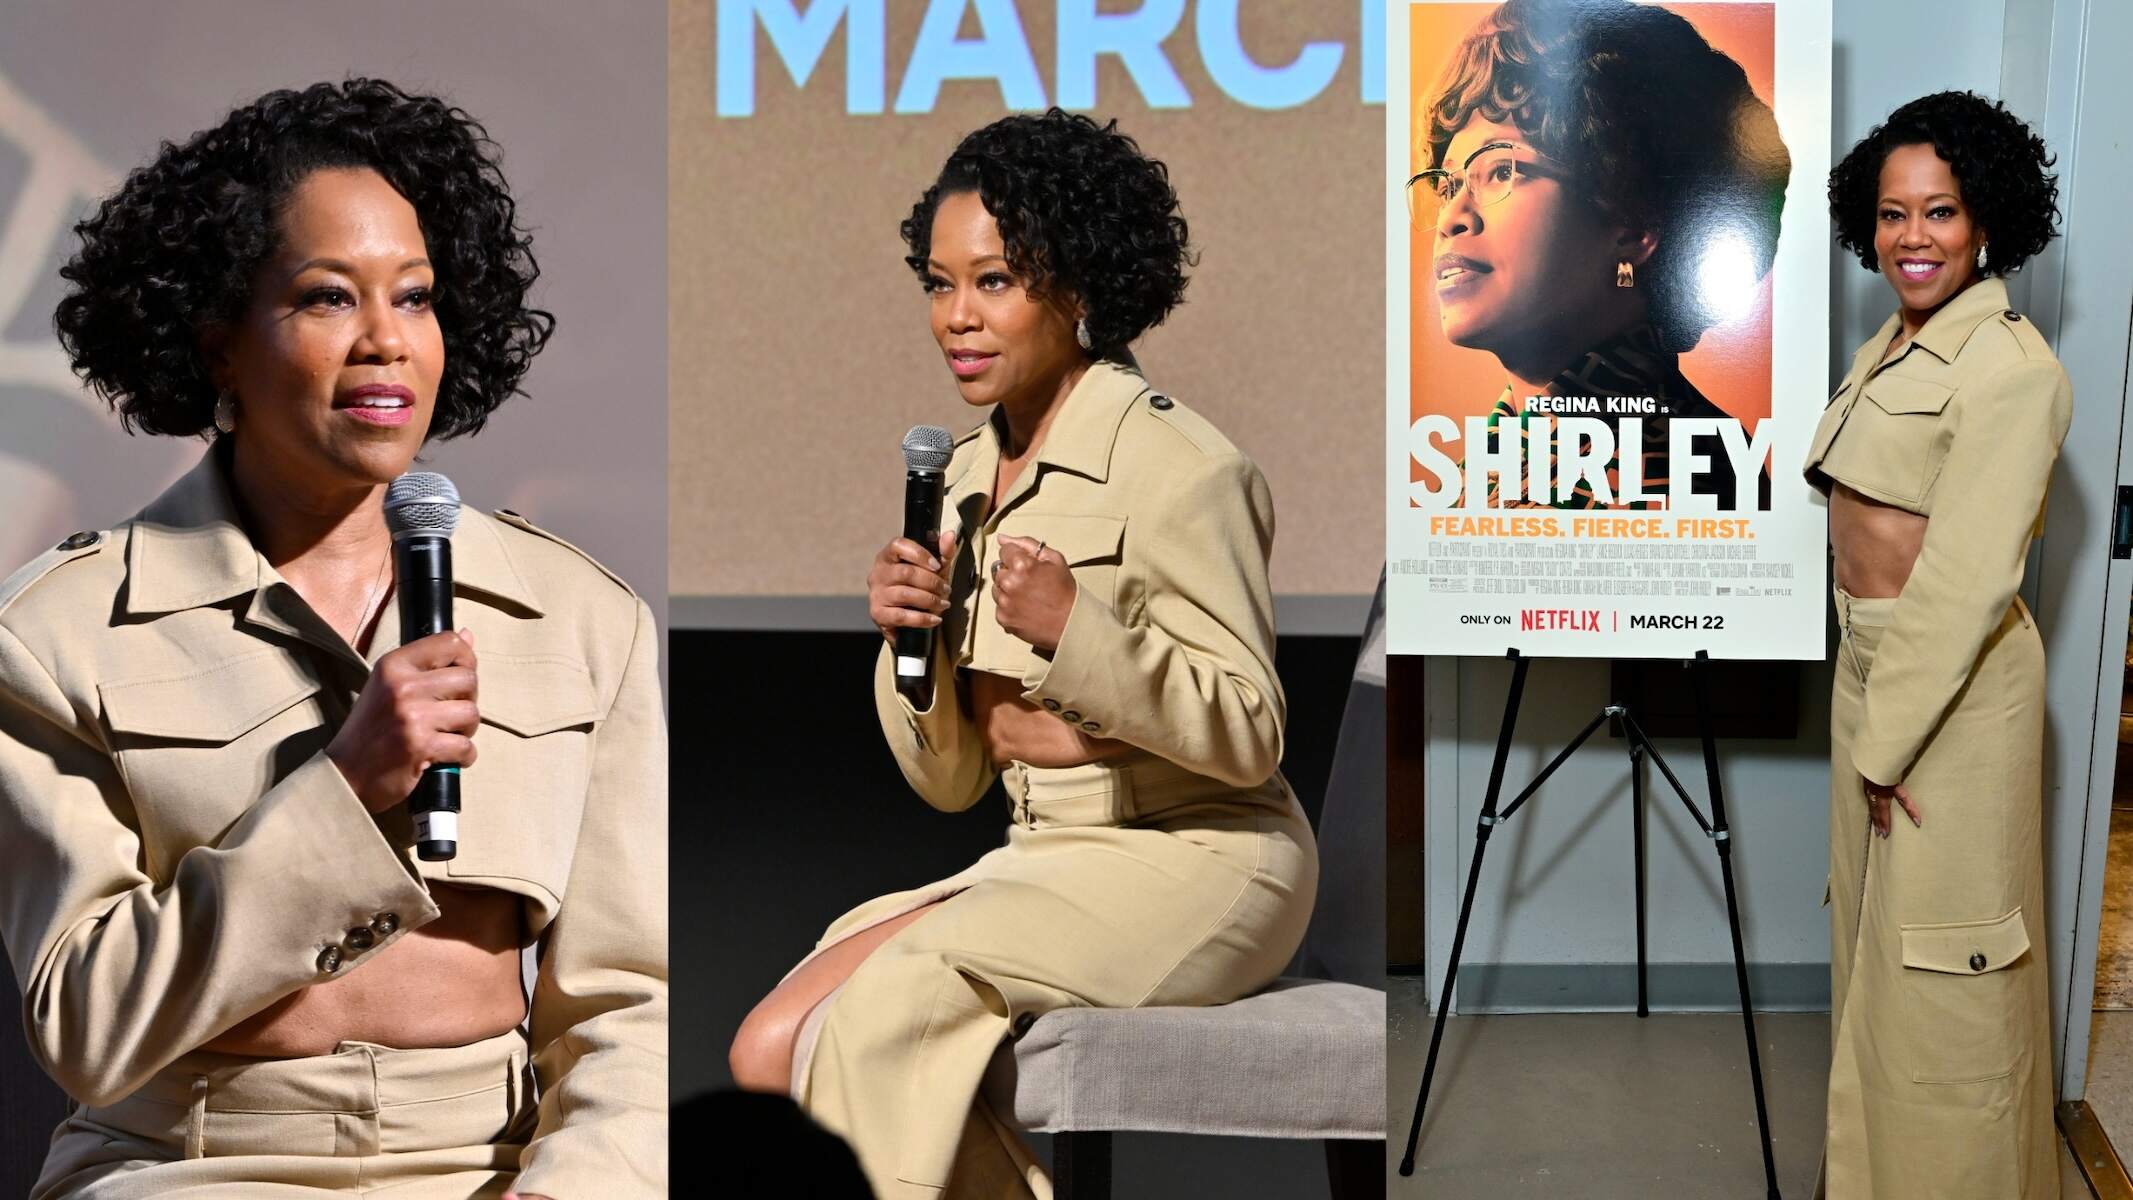 Wearing a khaki two-piece outfit, Regina King speaks onstage during the Shirley Advance movie Screening